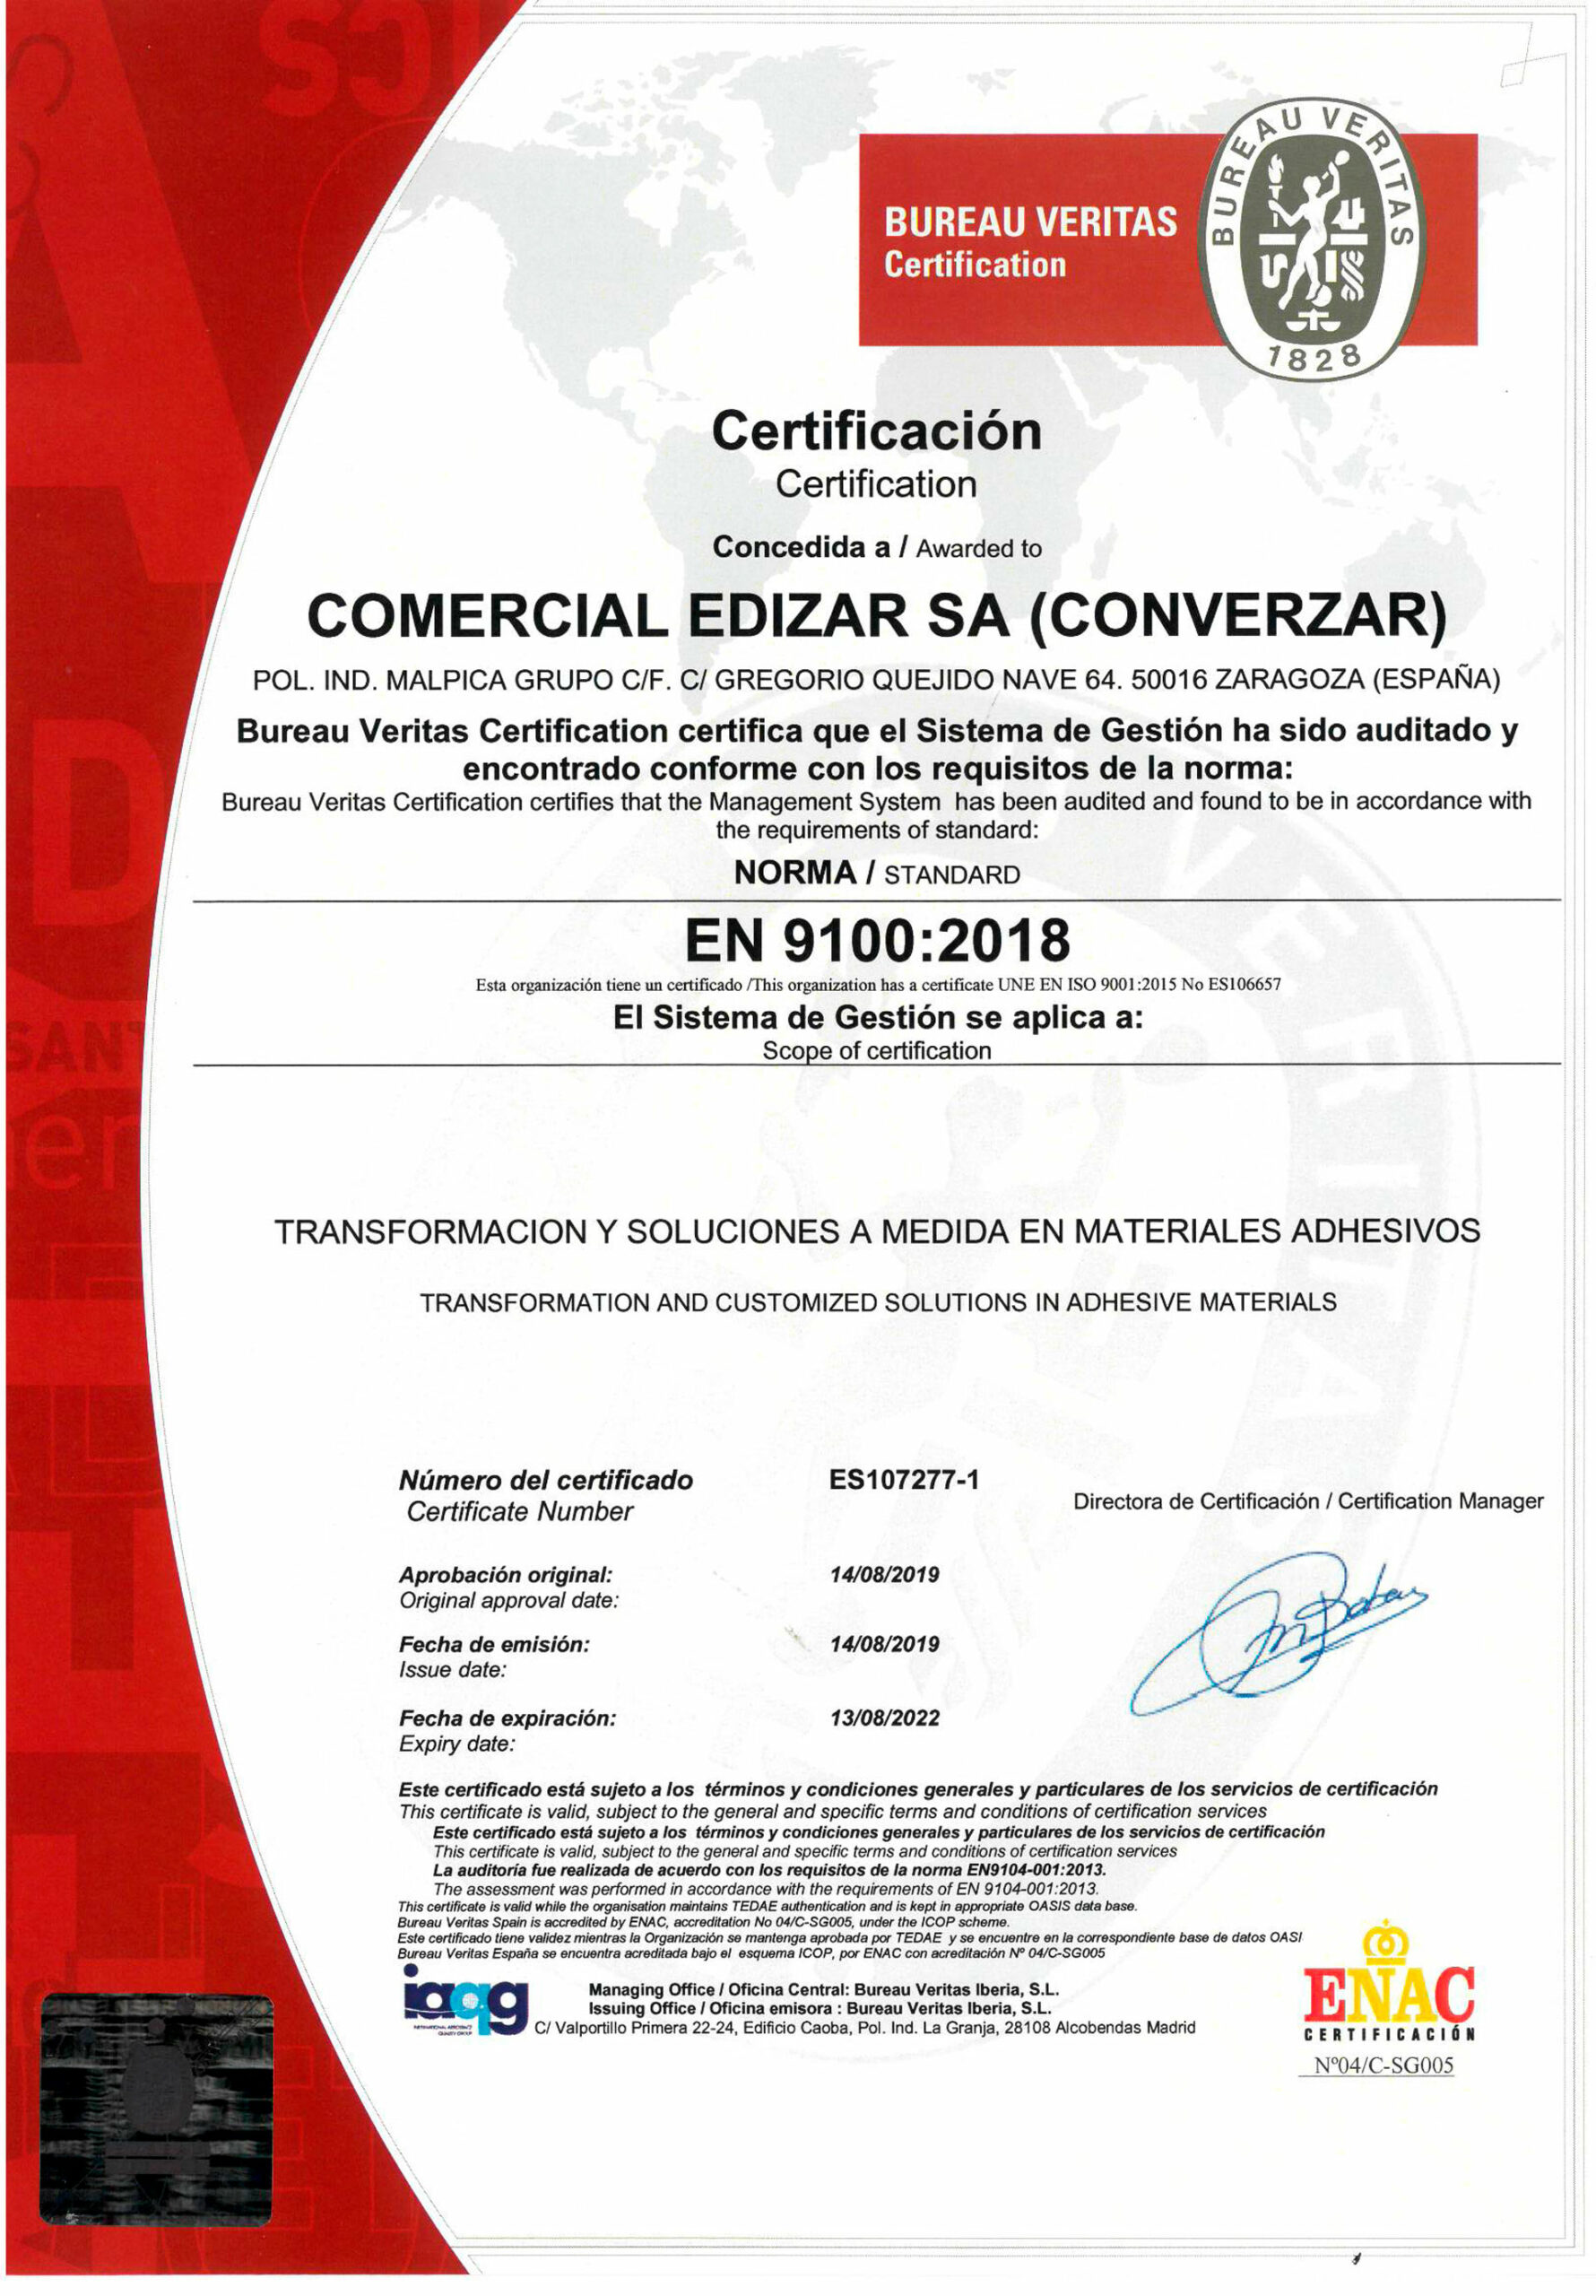 converzar-2joint-iso9100-es